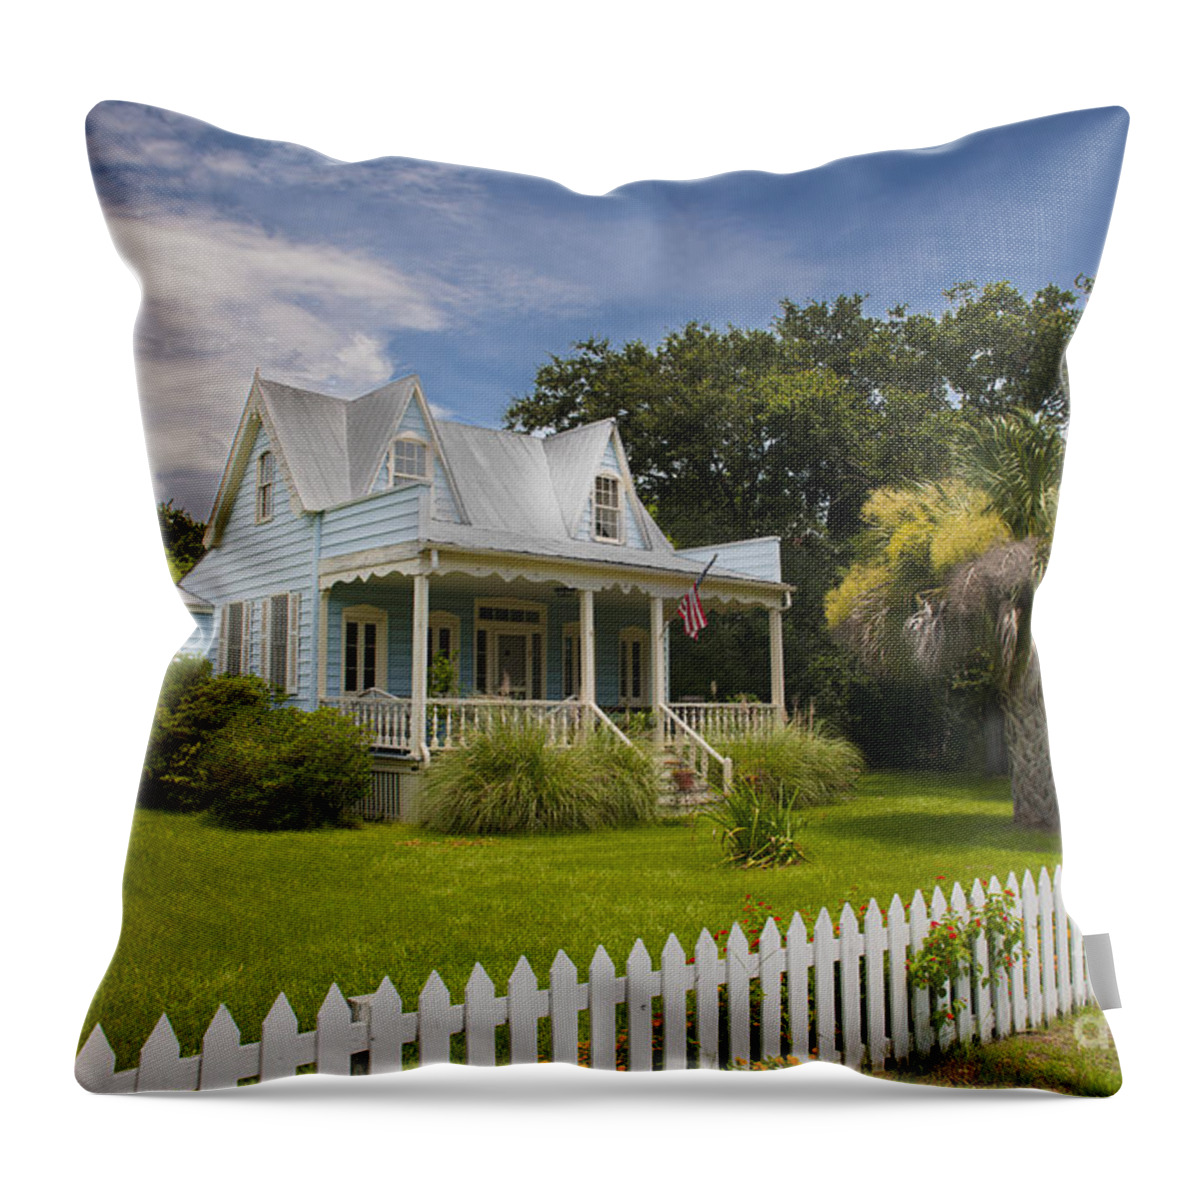 Sullivan's Island Throw Pillow featuring the photograph Sullivan's Island Home by Dale Powell